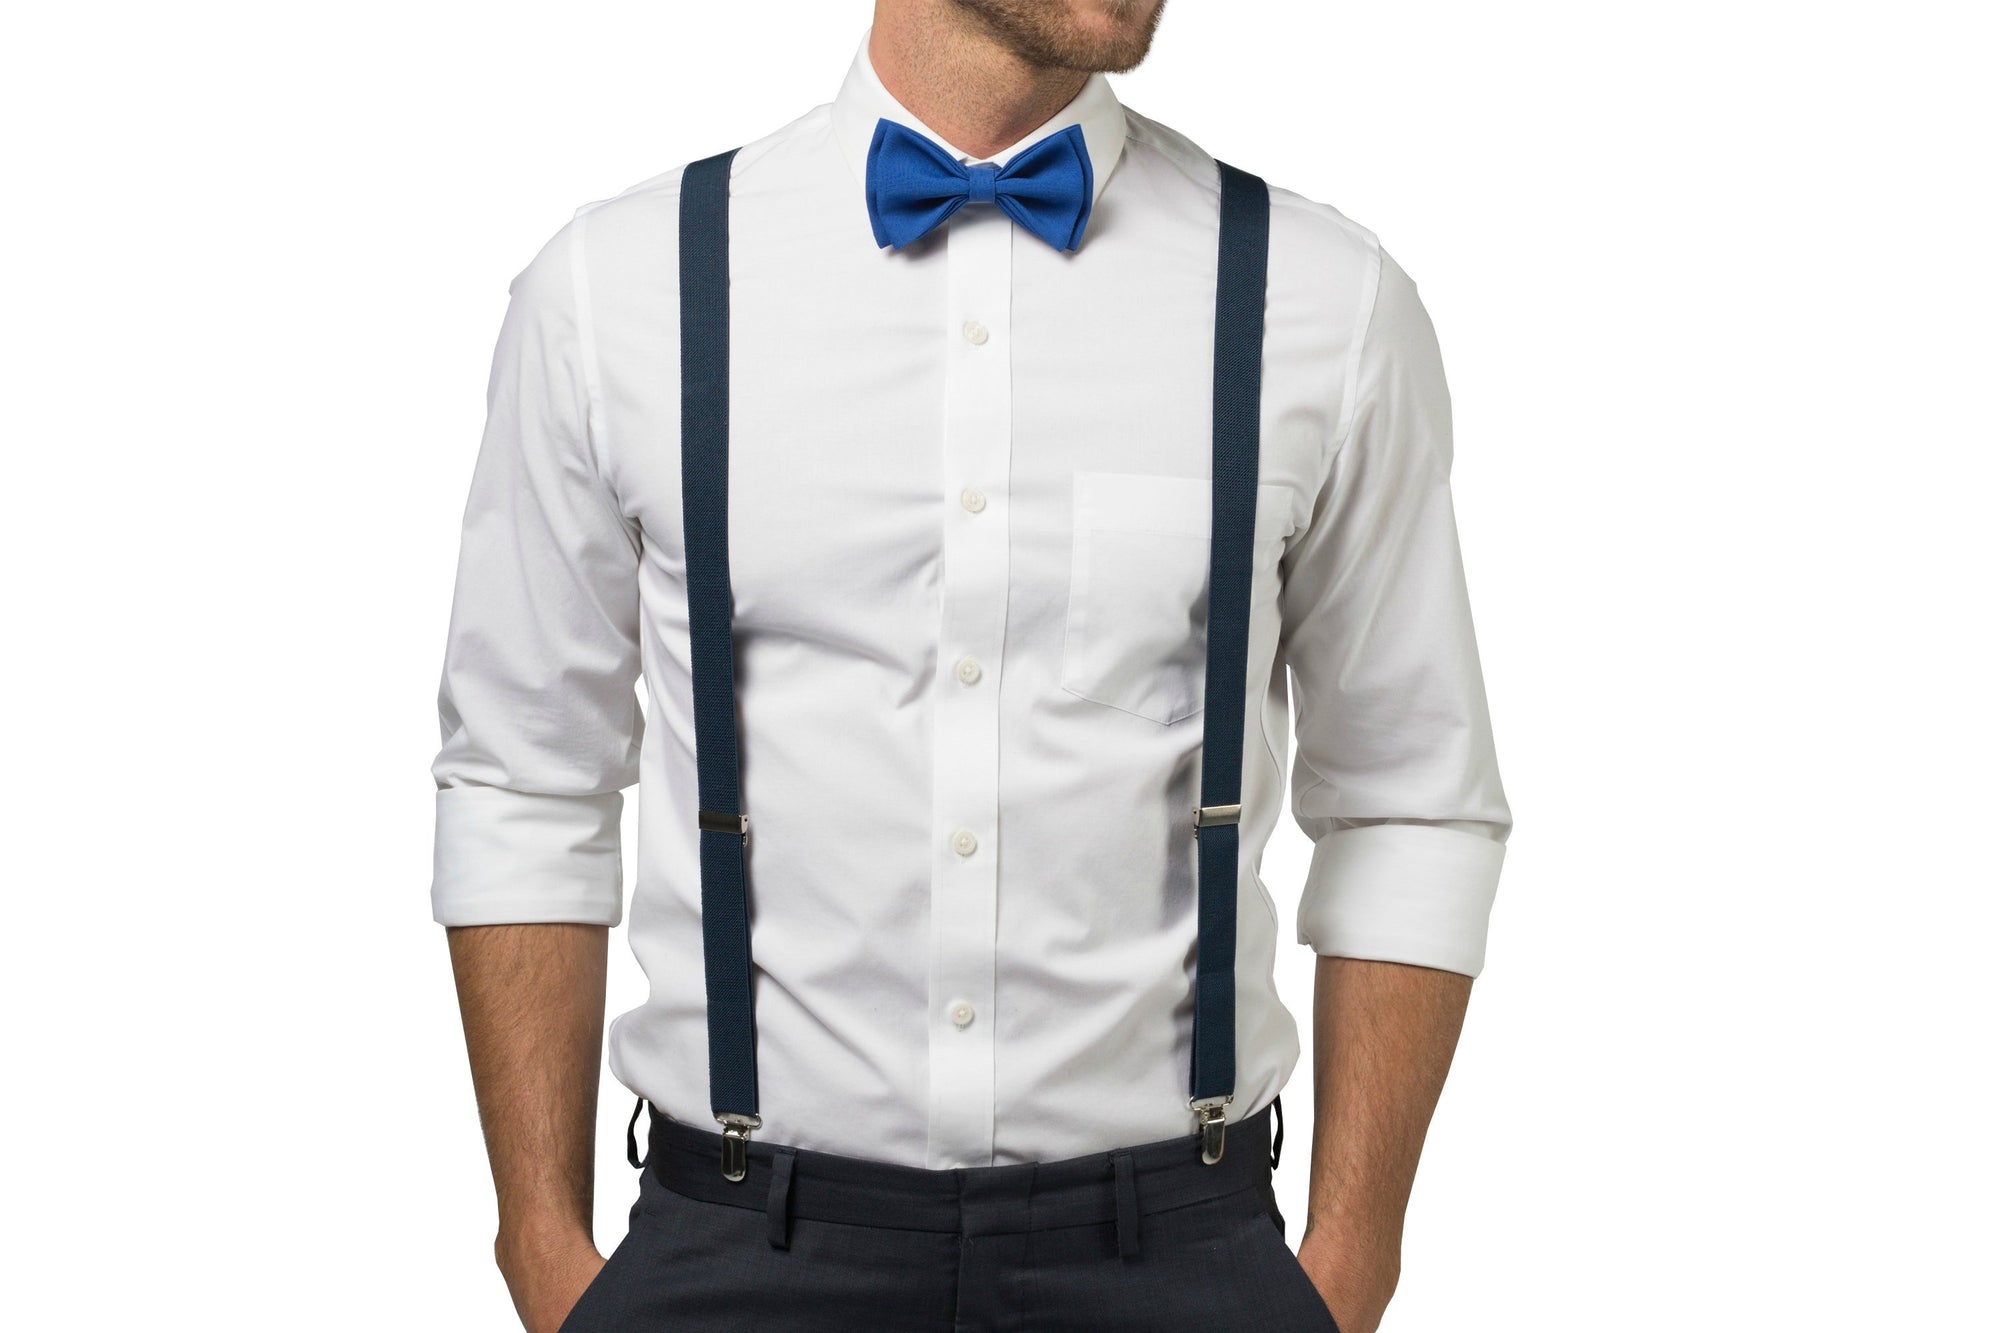 Navy Suspenders & Royal Blue Bow Tie - Baby to Adult Sizes